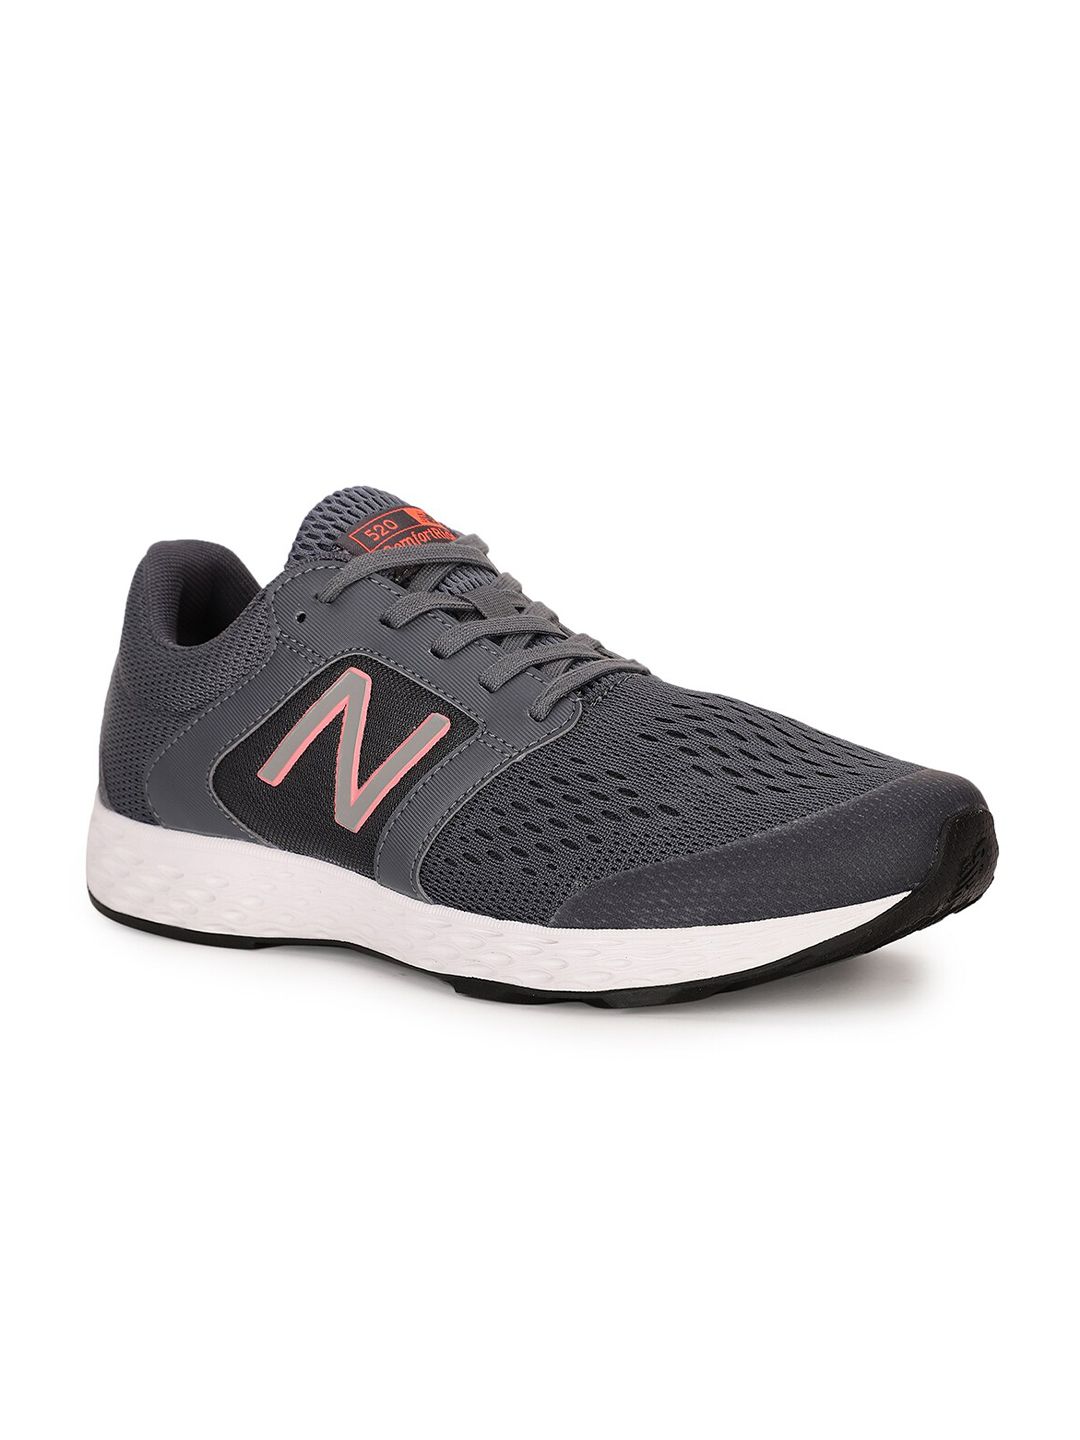 New Balance Women Grey Woven Design Running Shoes Price in India